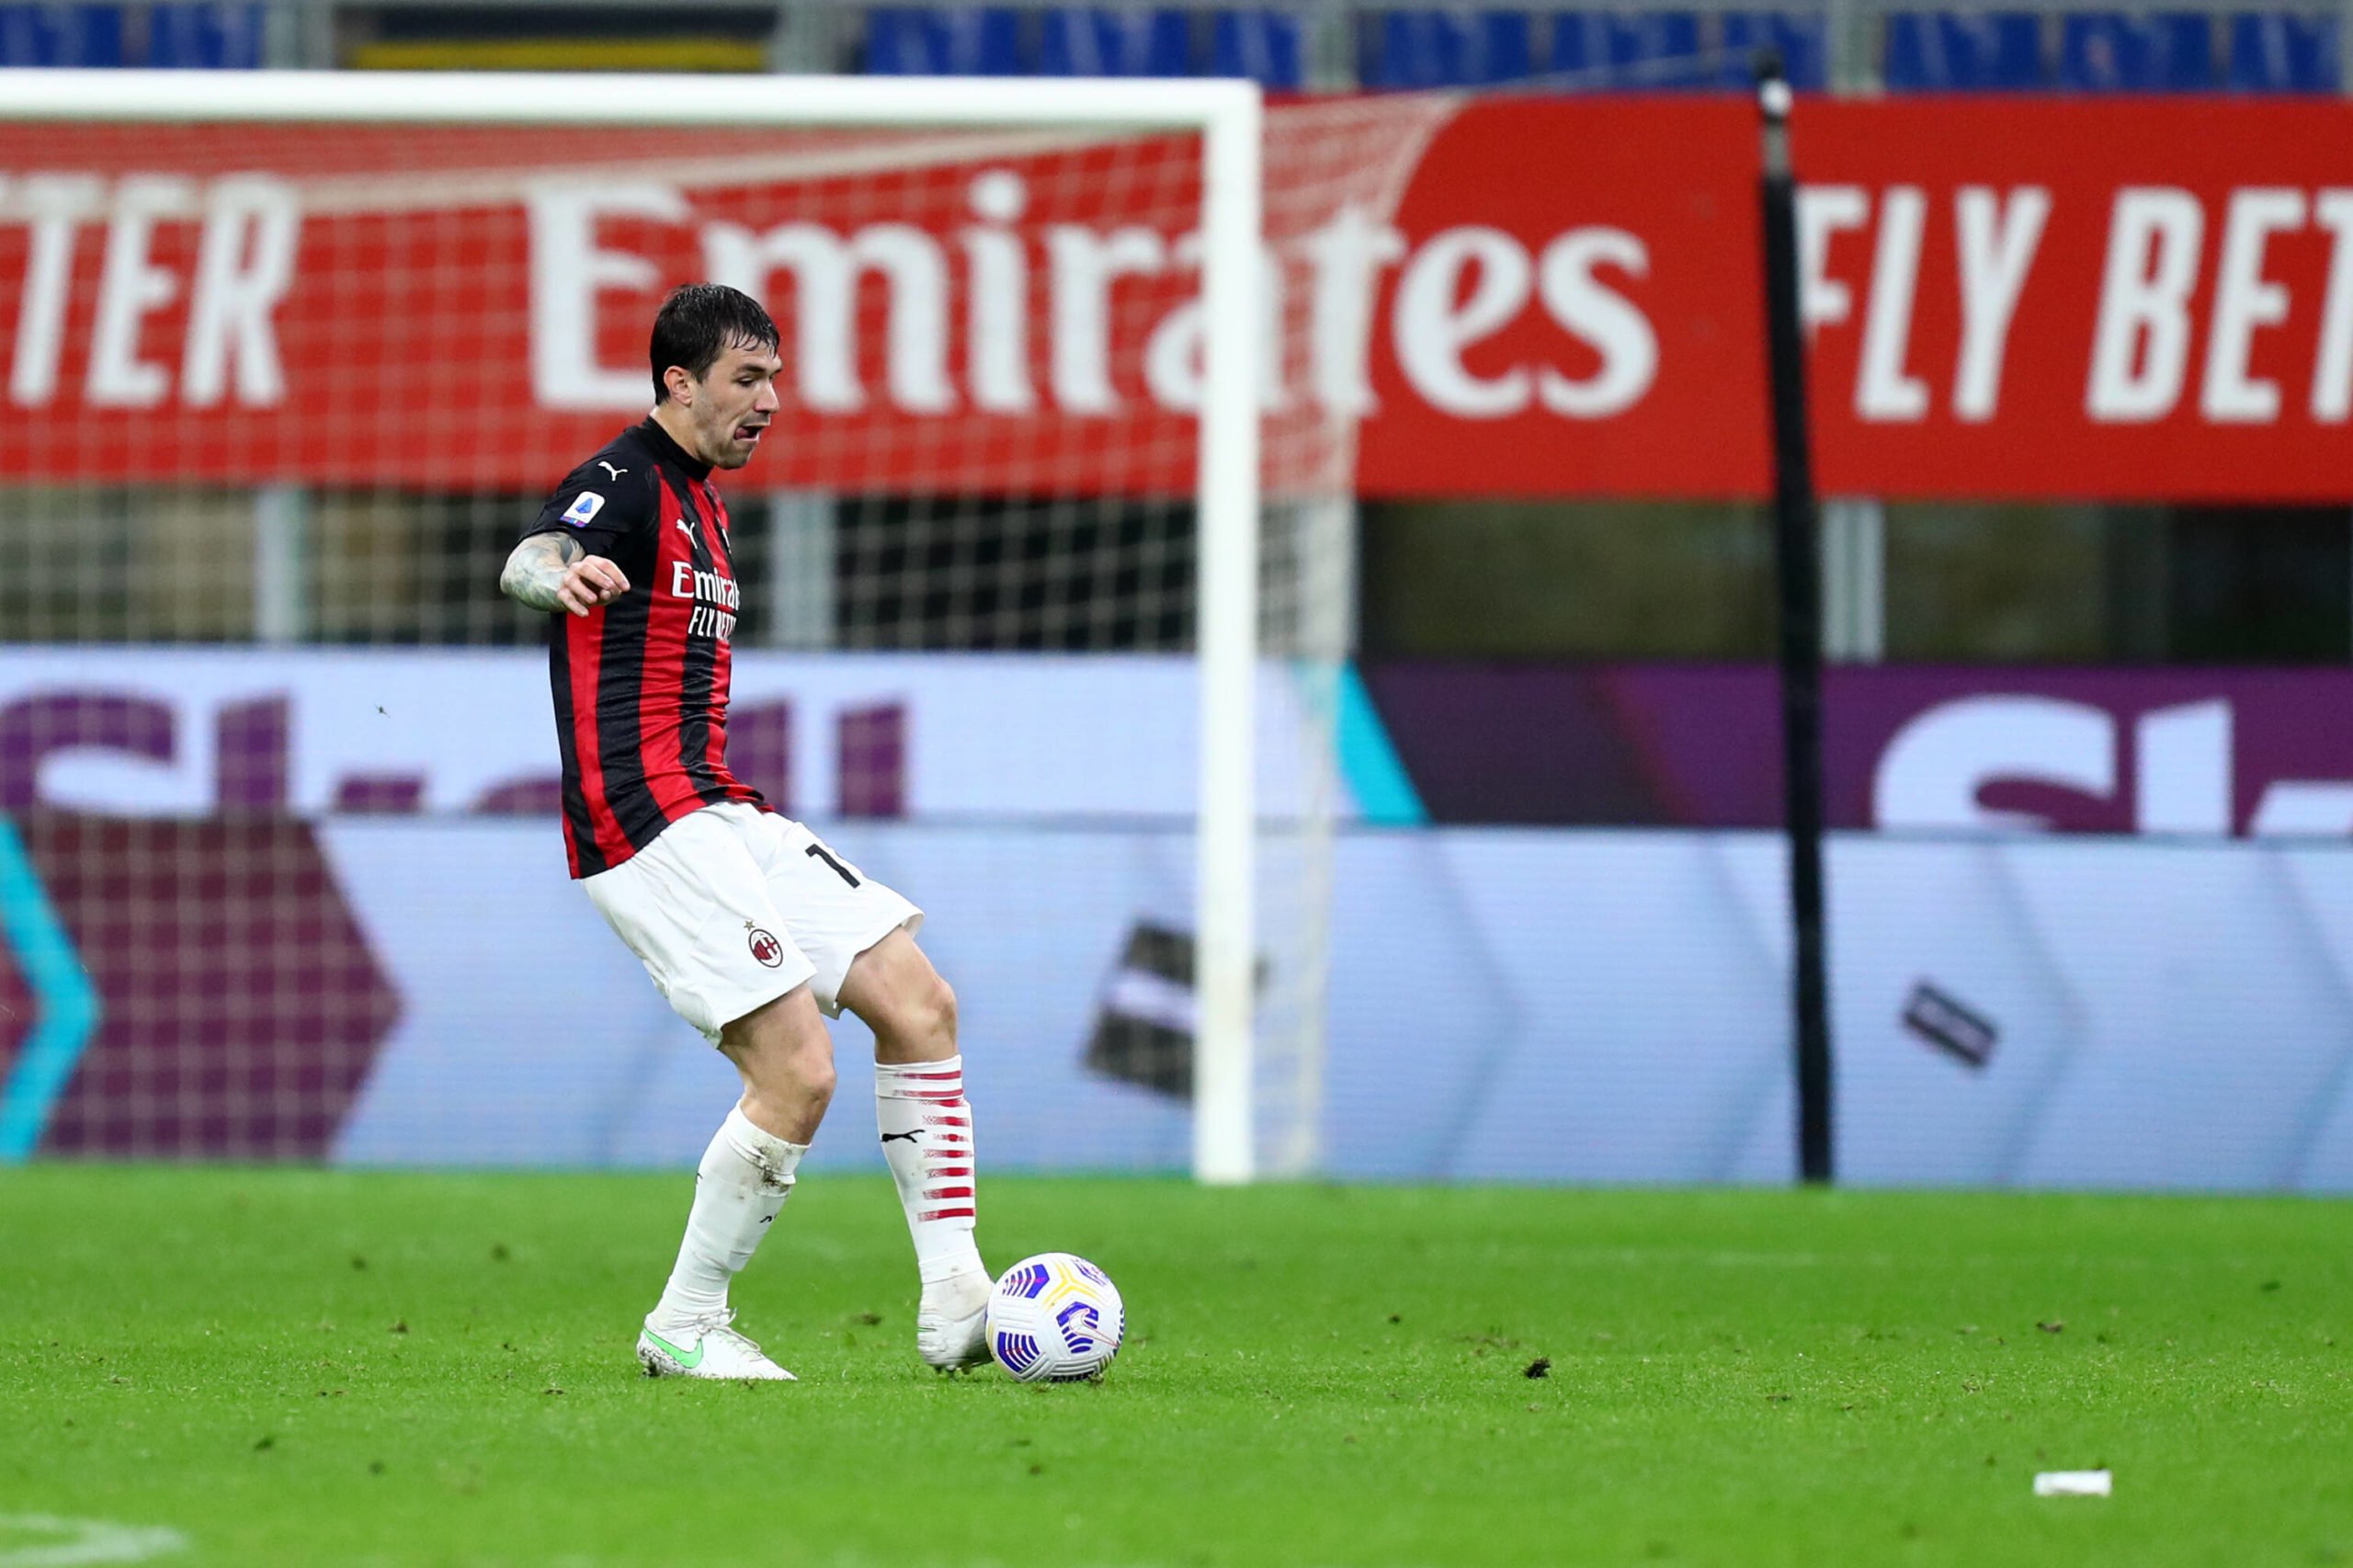 Real Madrid willing to give up Isco for Romagnoli who is seen in the photo